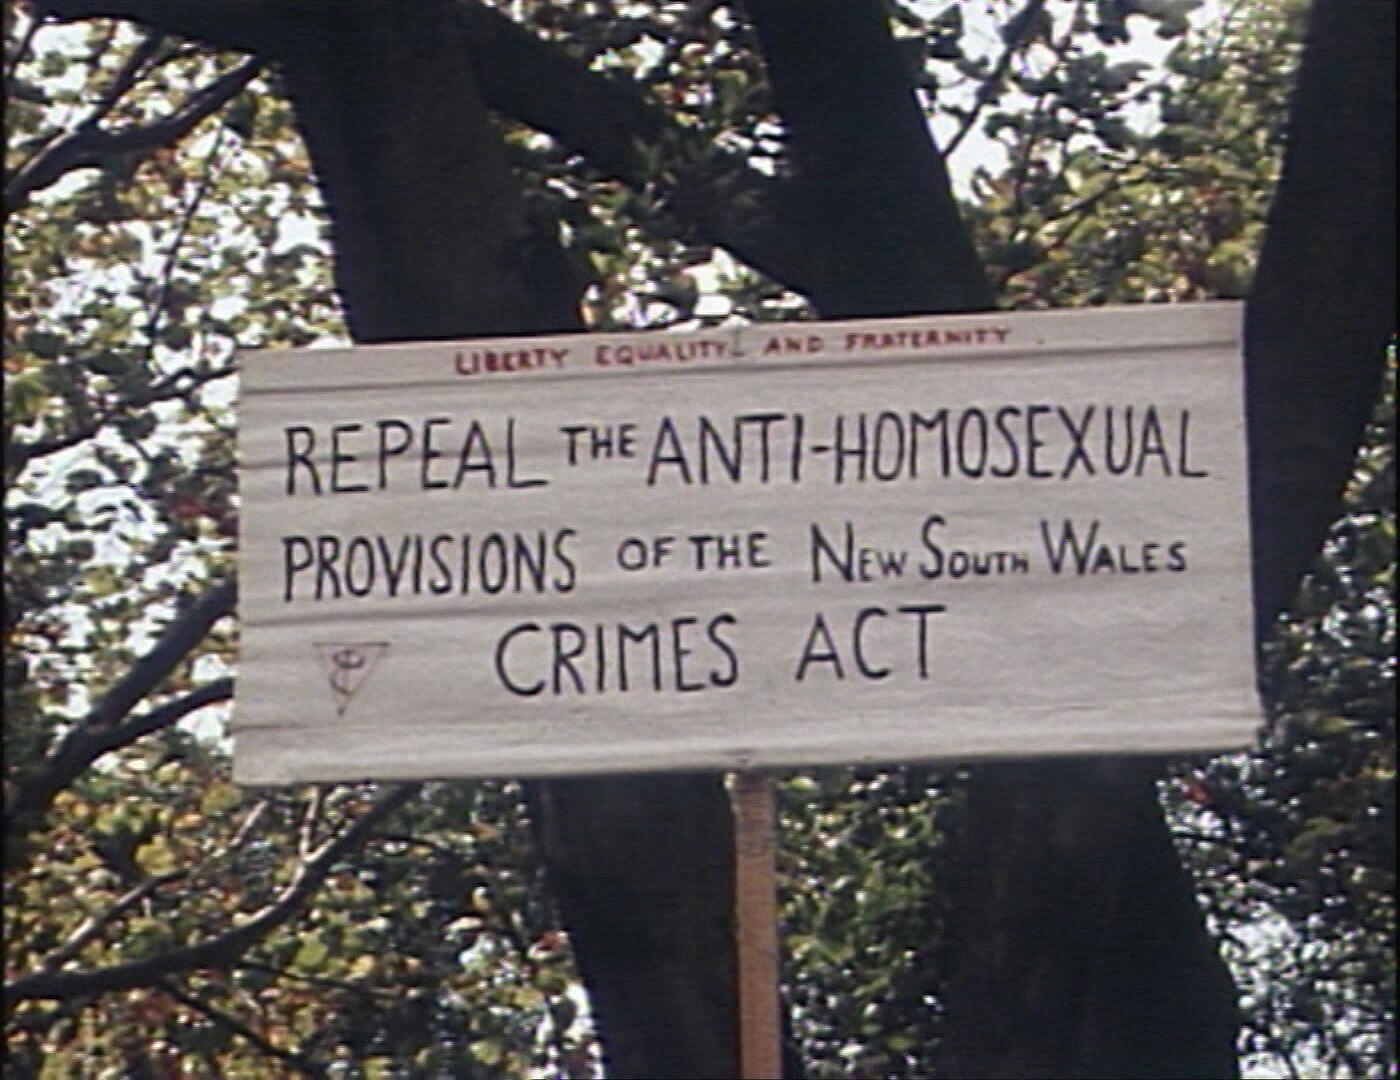 a banner in favourof gay rights on a tree which reads, repeal the anti-homosexual provision of nsw crimes act